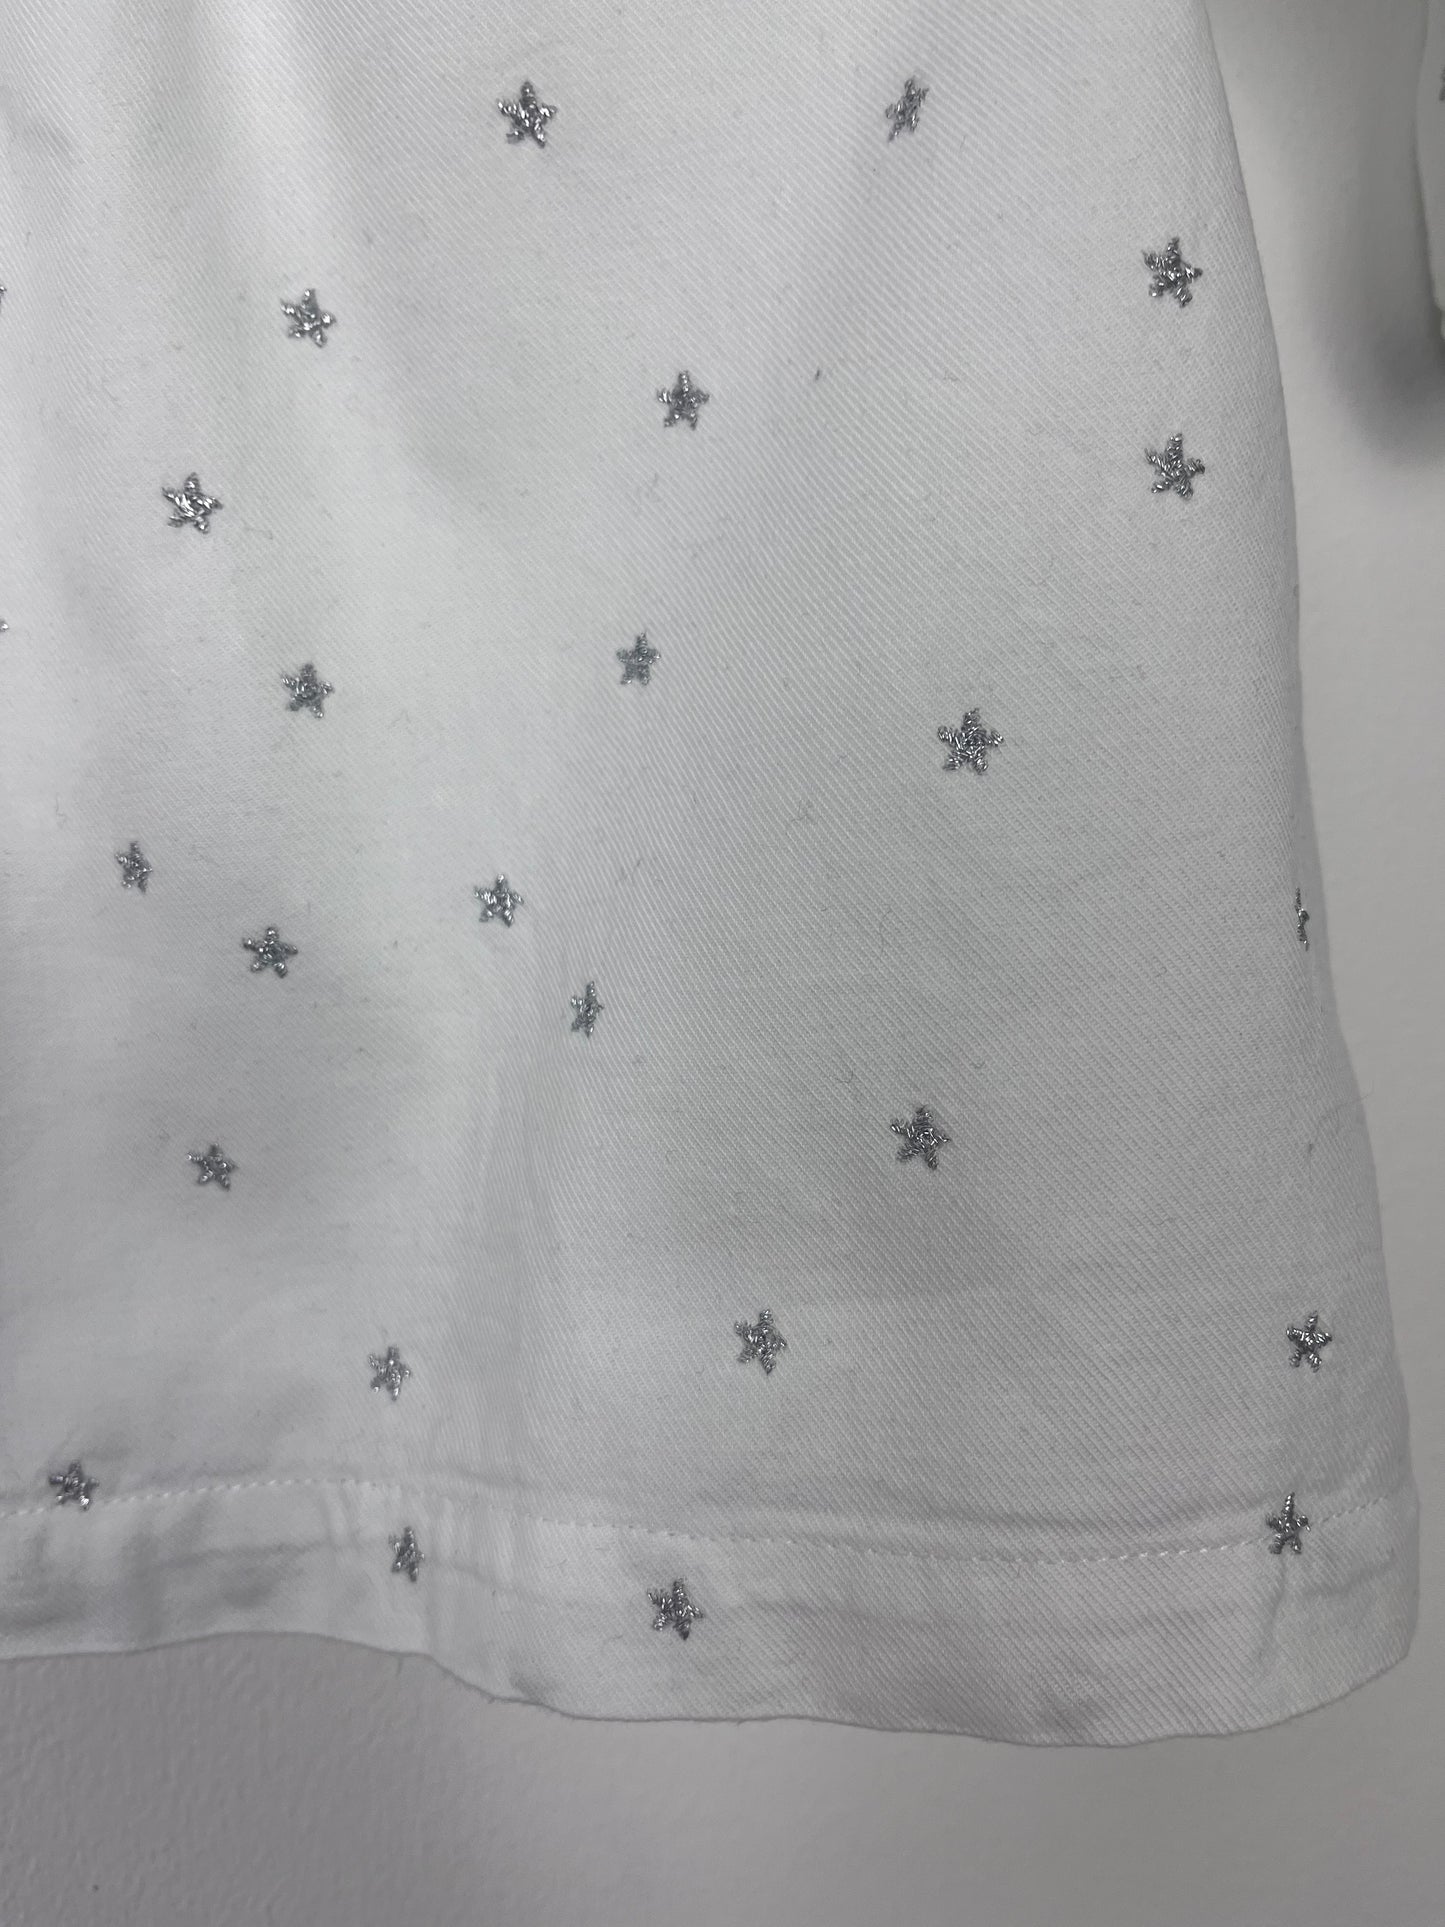 The Little White Company 9-12 Months-Dresses-Second Snuggle Preloved